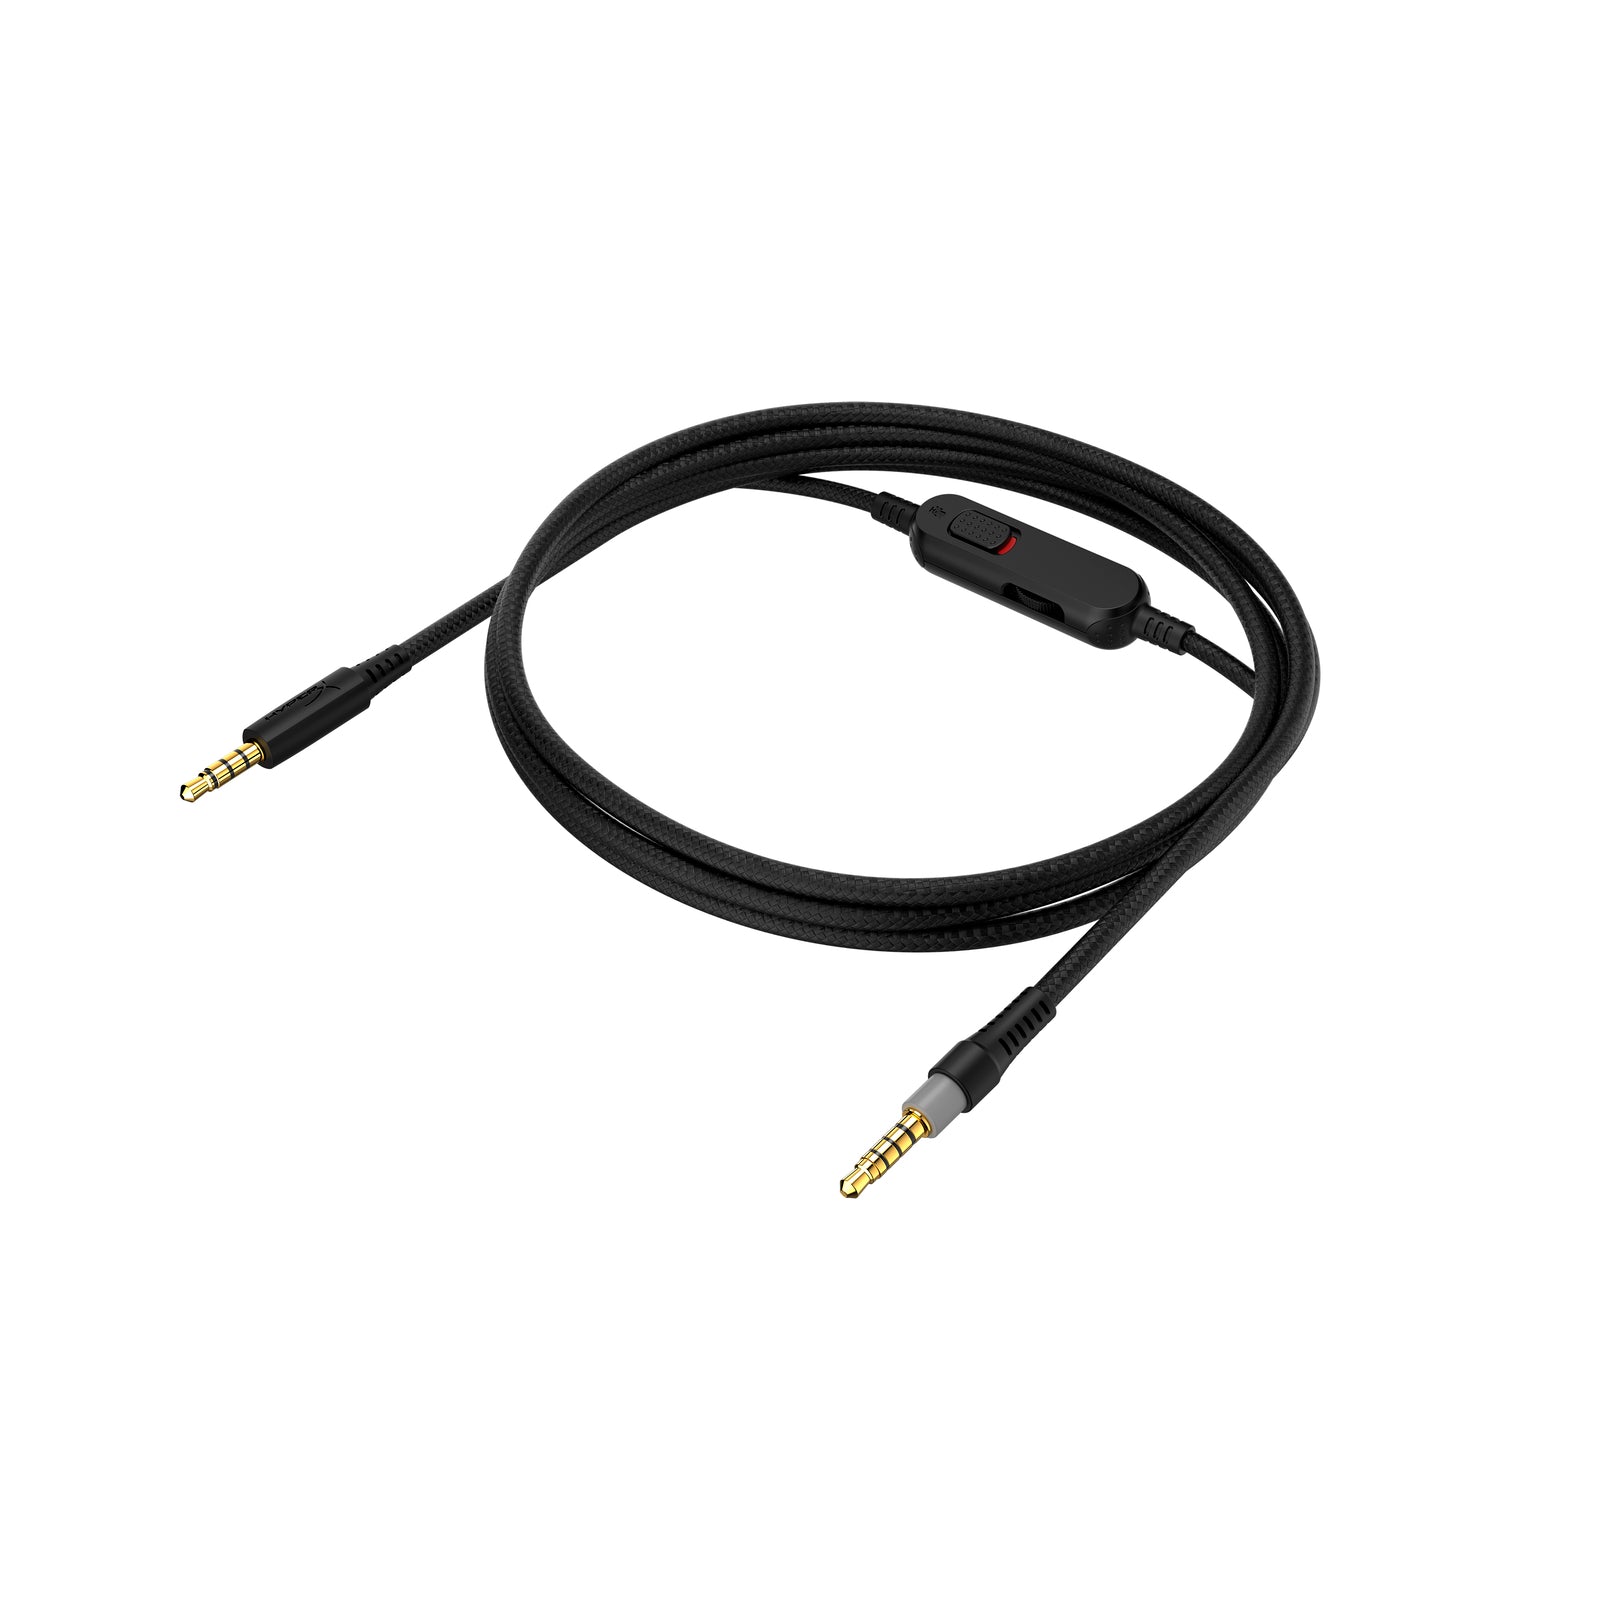  QKIIP HyperX Cloud Alpha Cable, Removable Replacement Alpha  Cord, with Mute & Volume Controls Compatible with HyperX Cloud Mix Alpha  Gaming Headset (No Mic) : Electronics